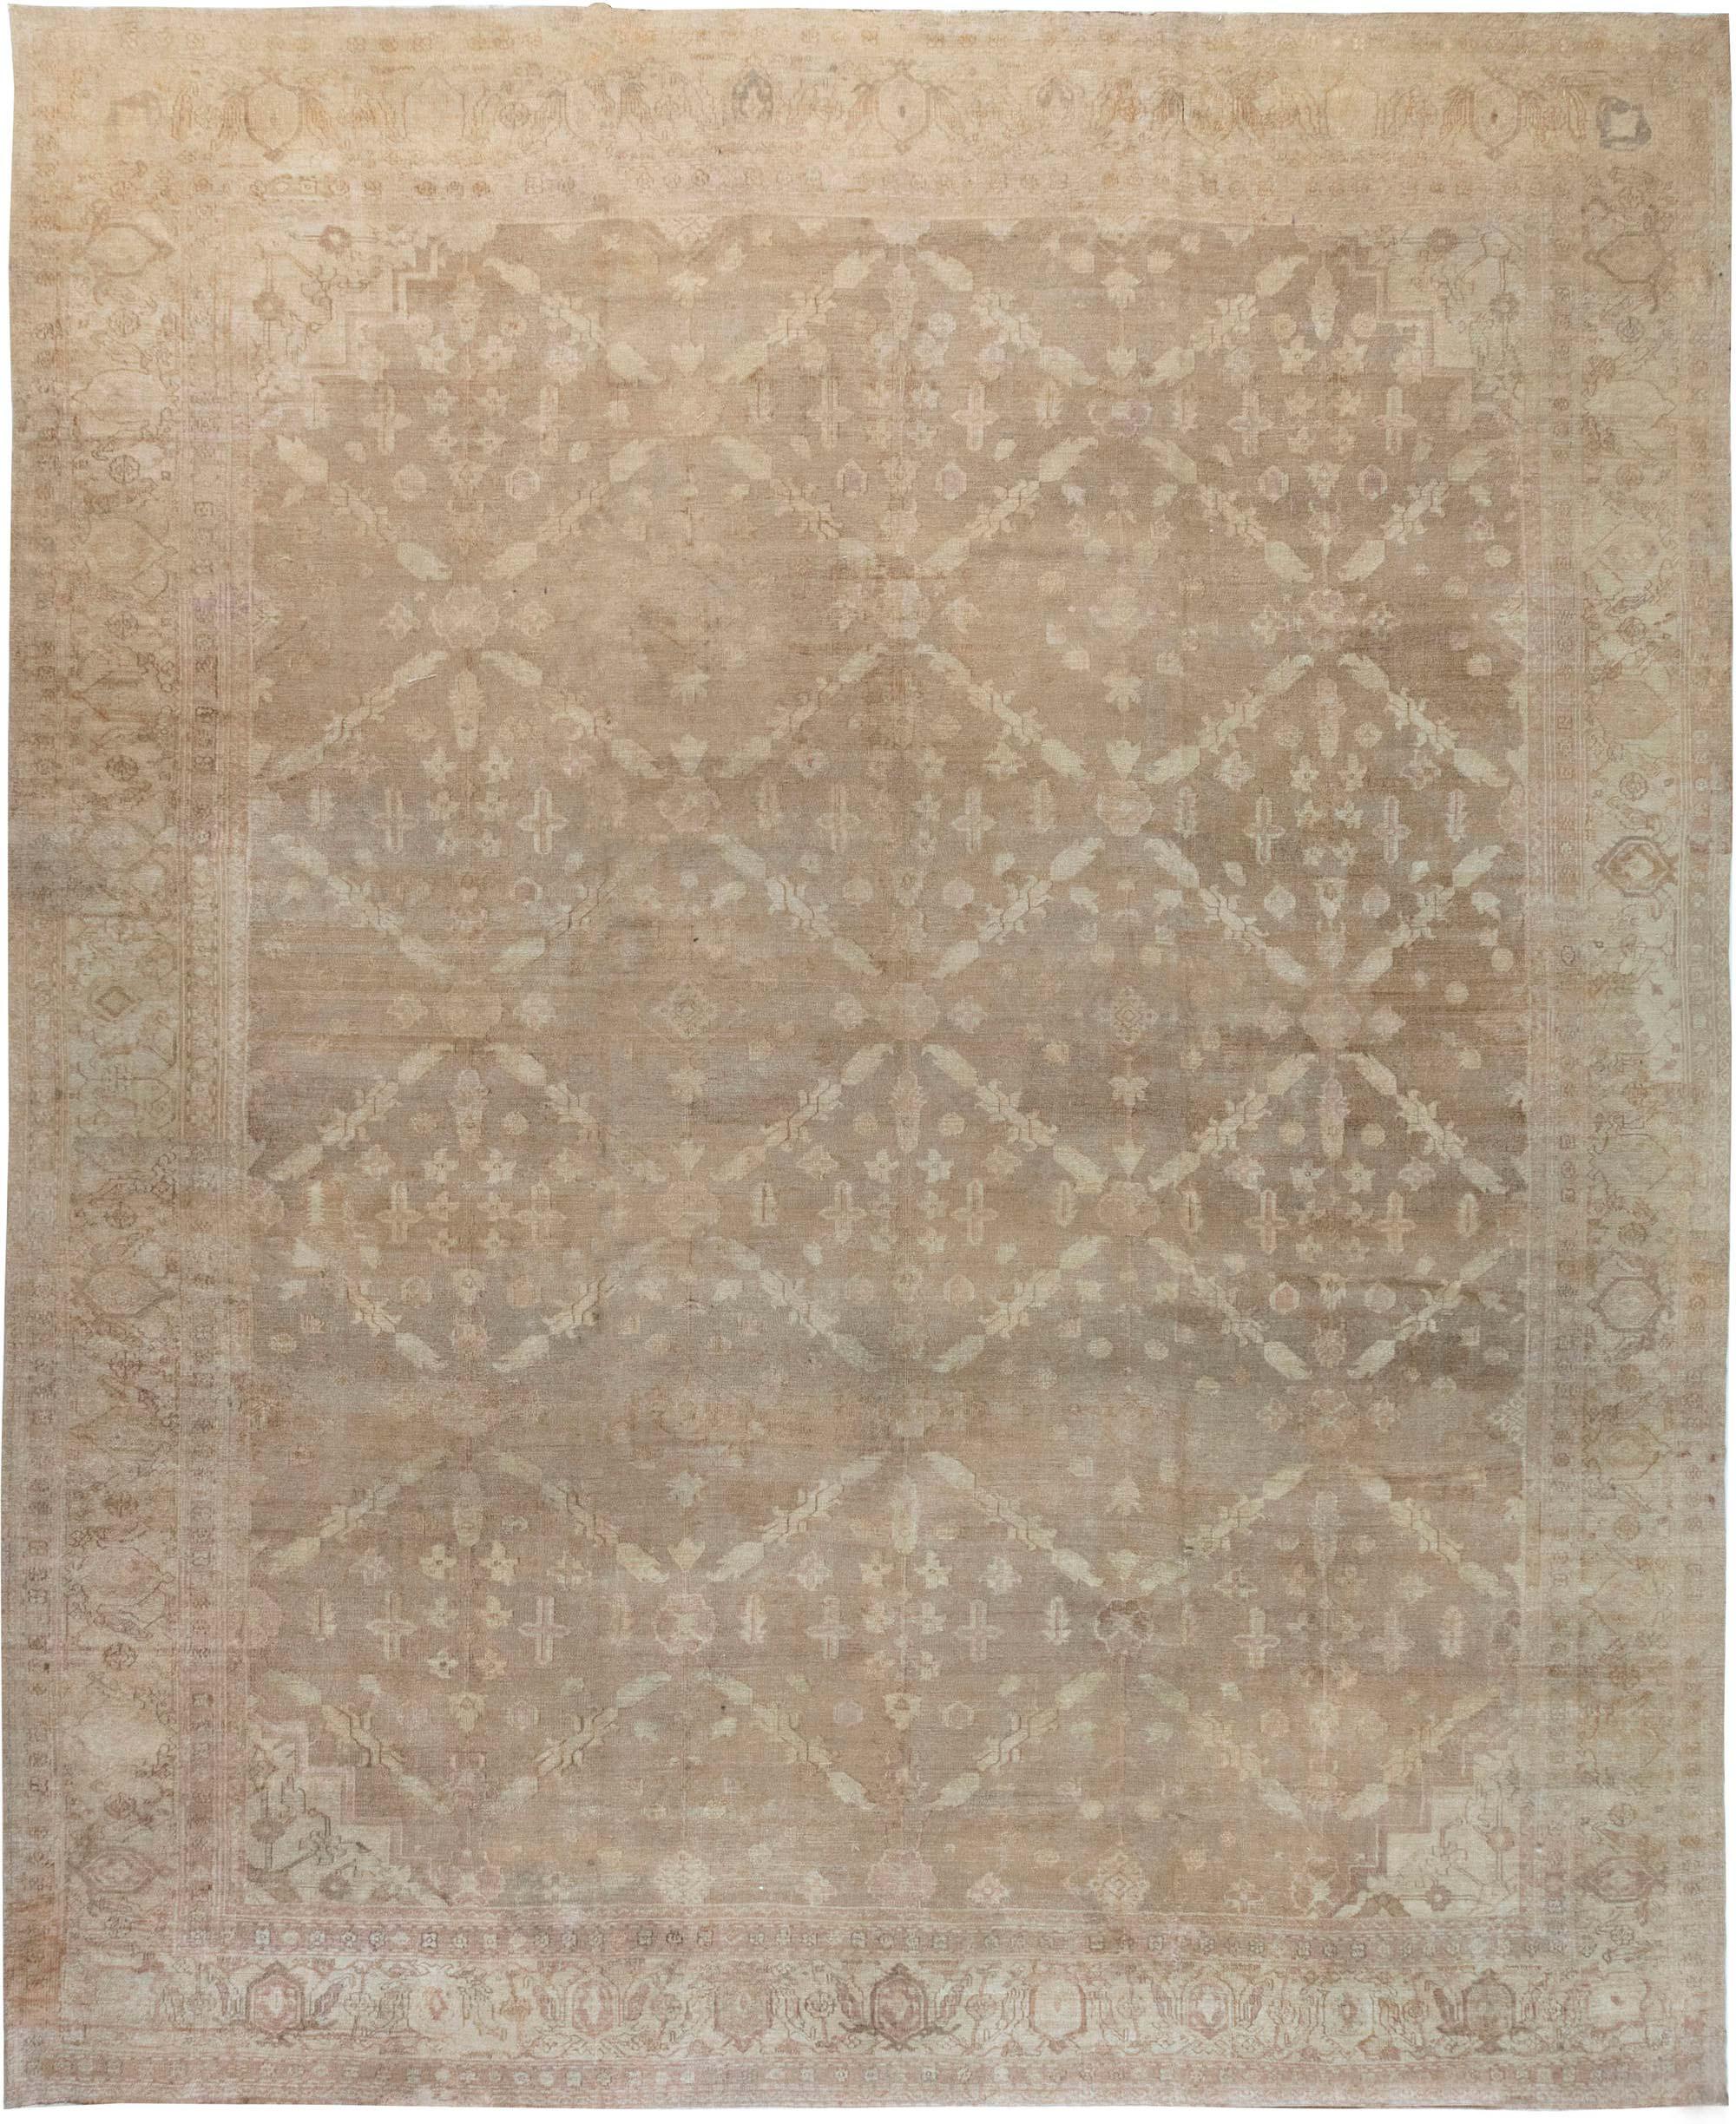 Large Indian Amritsar Brown Handmade Wool Rug For Sale